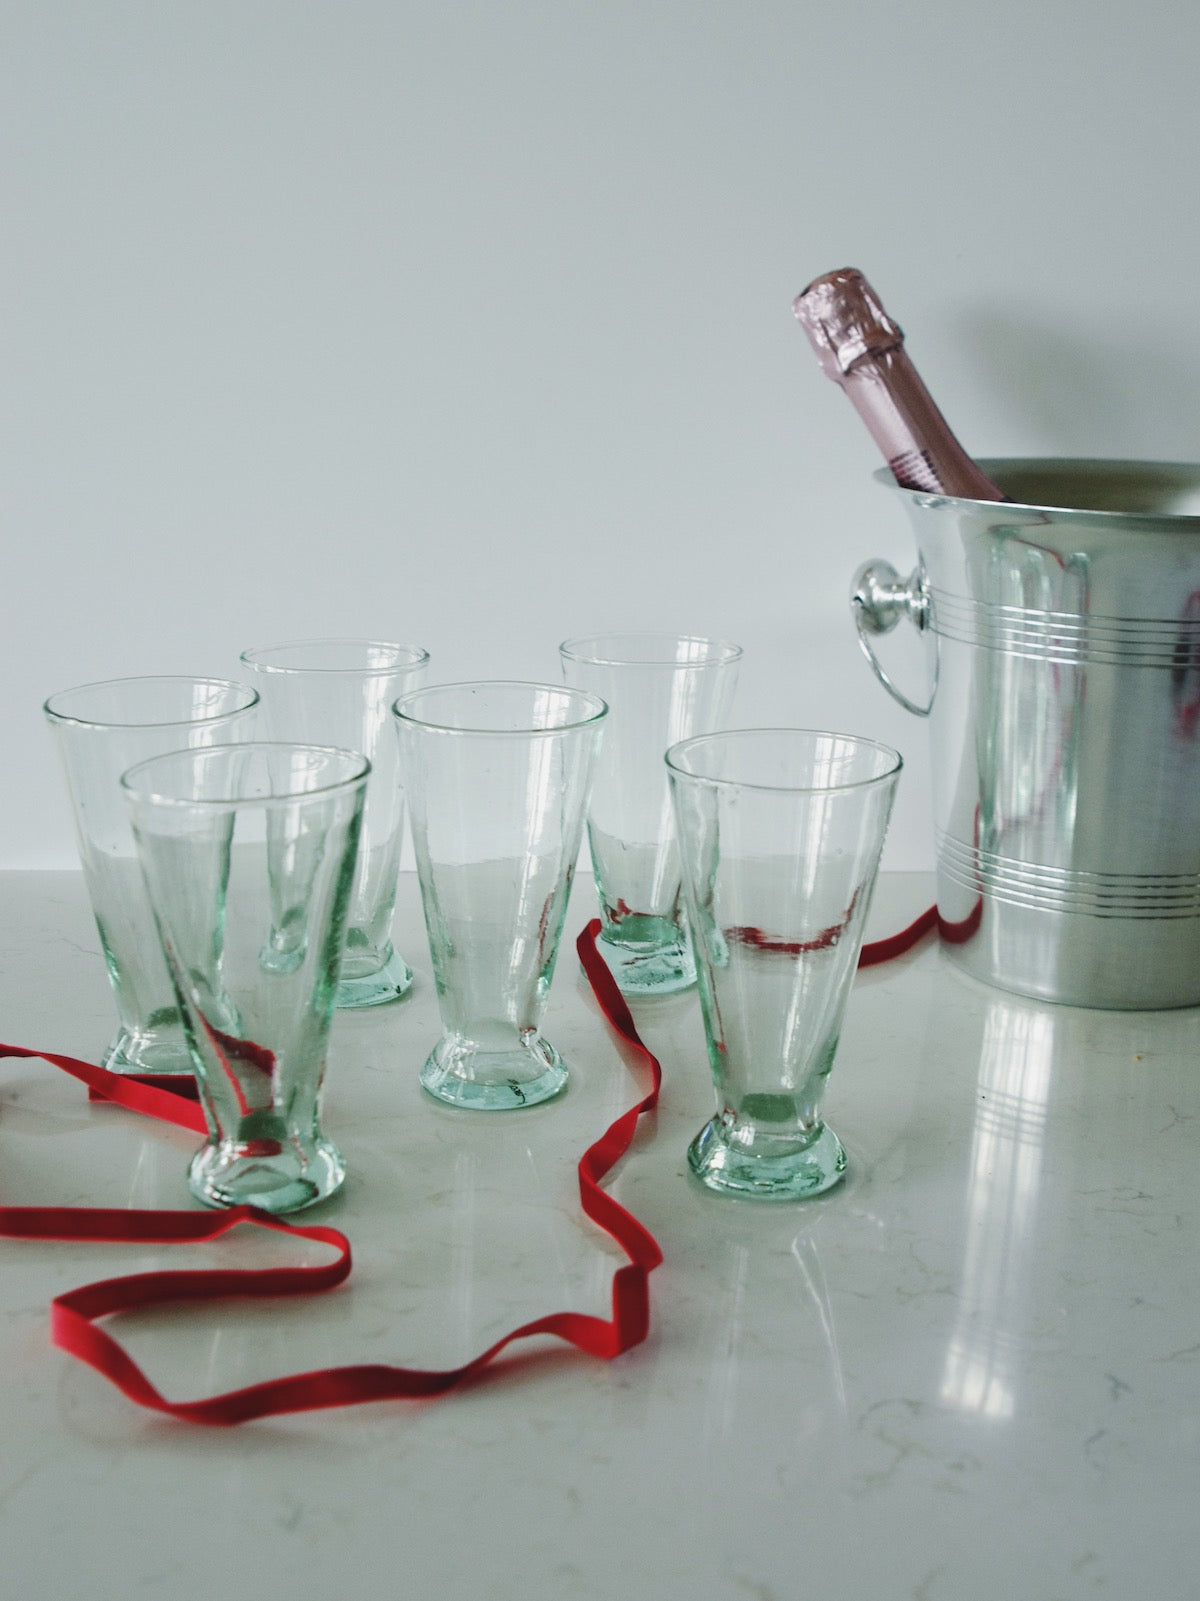 Recycled wine flutes with a red ribbon and champagne bottle in a metal ice bucket on a marble surface.